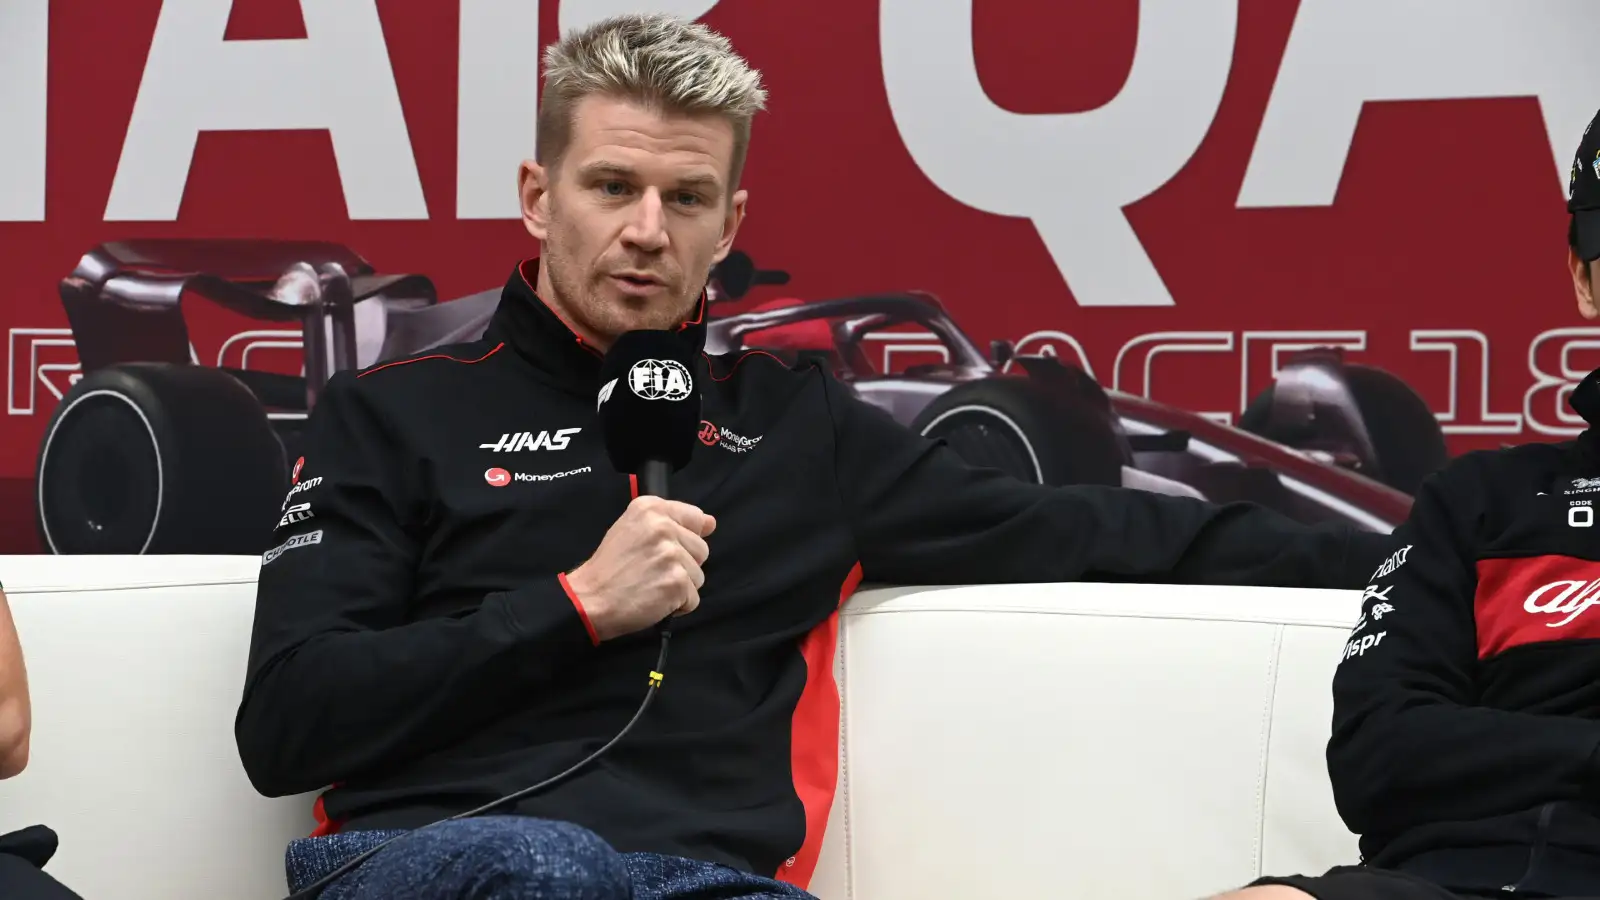 Haas' Nico Hulkenberg in the press conference ahead of the Qatar Grand Prix.